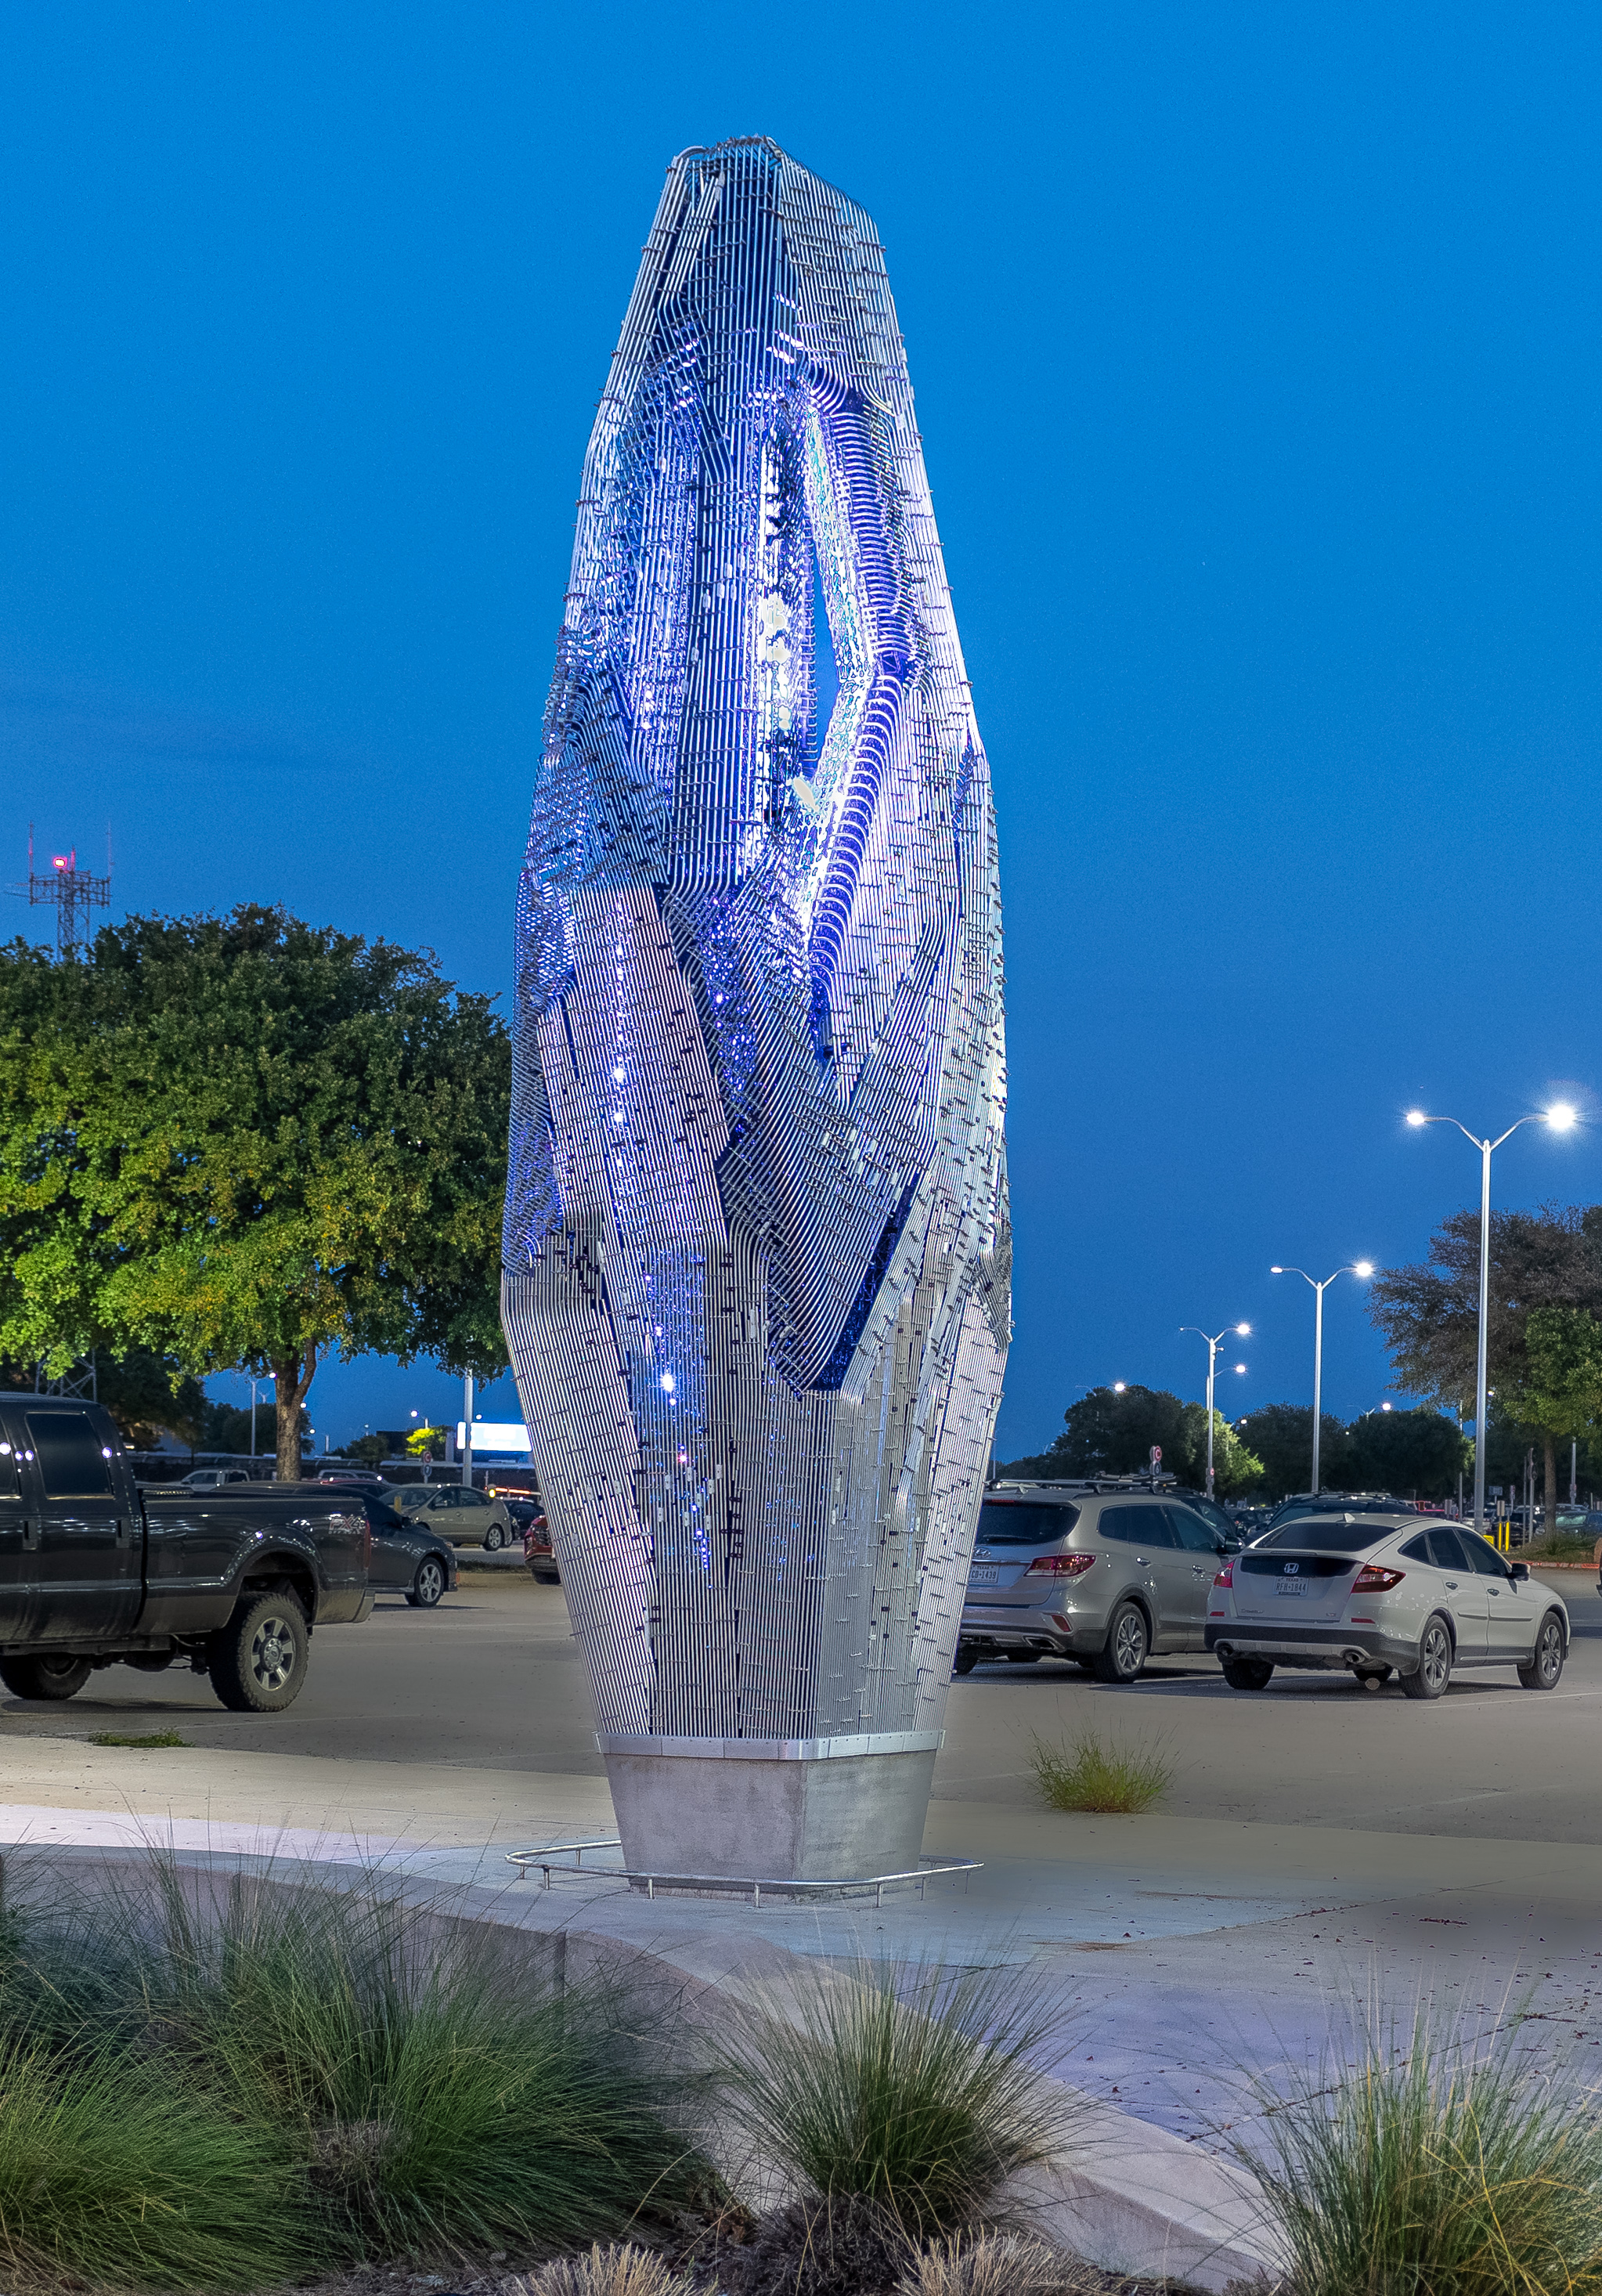 Plume by Clay Odom and Kory Bieg at the Austin Bergstrom International Airport